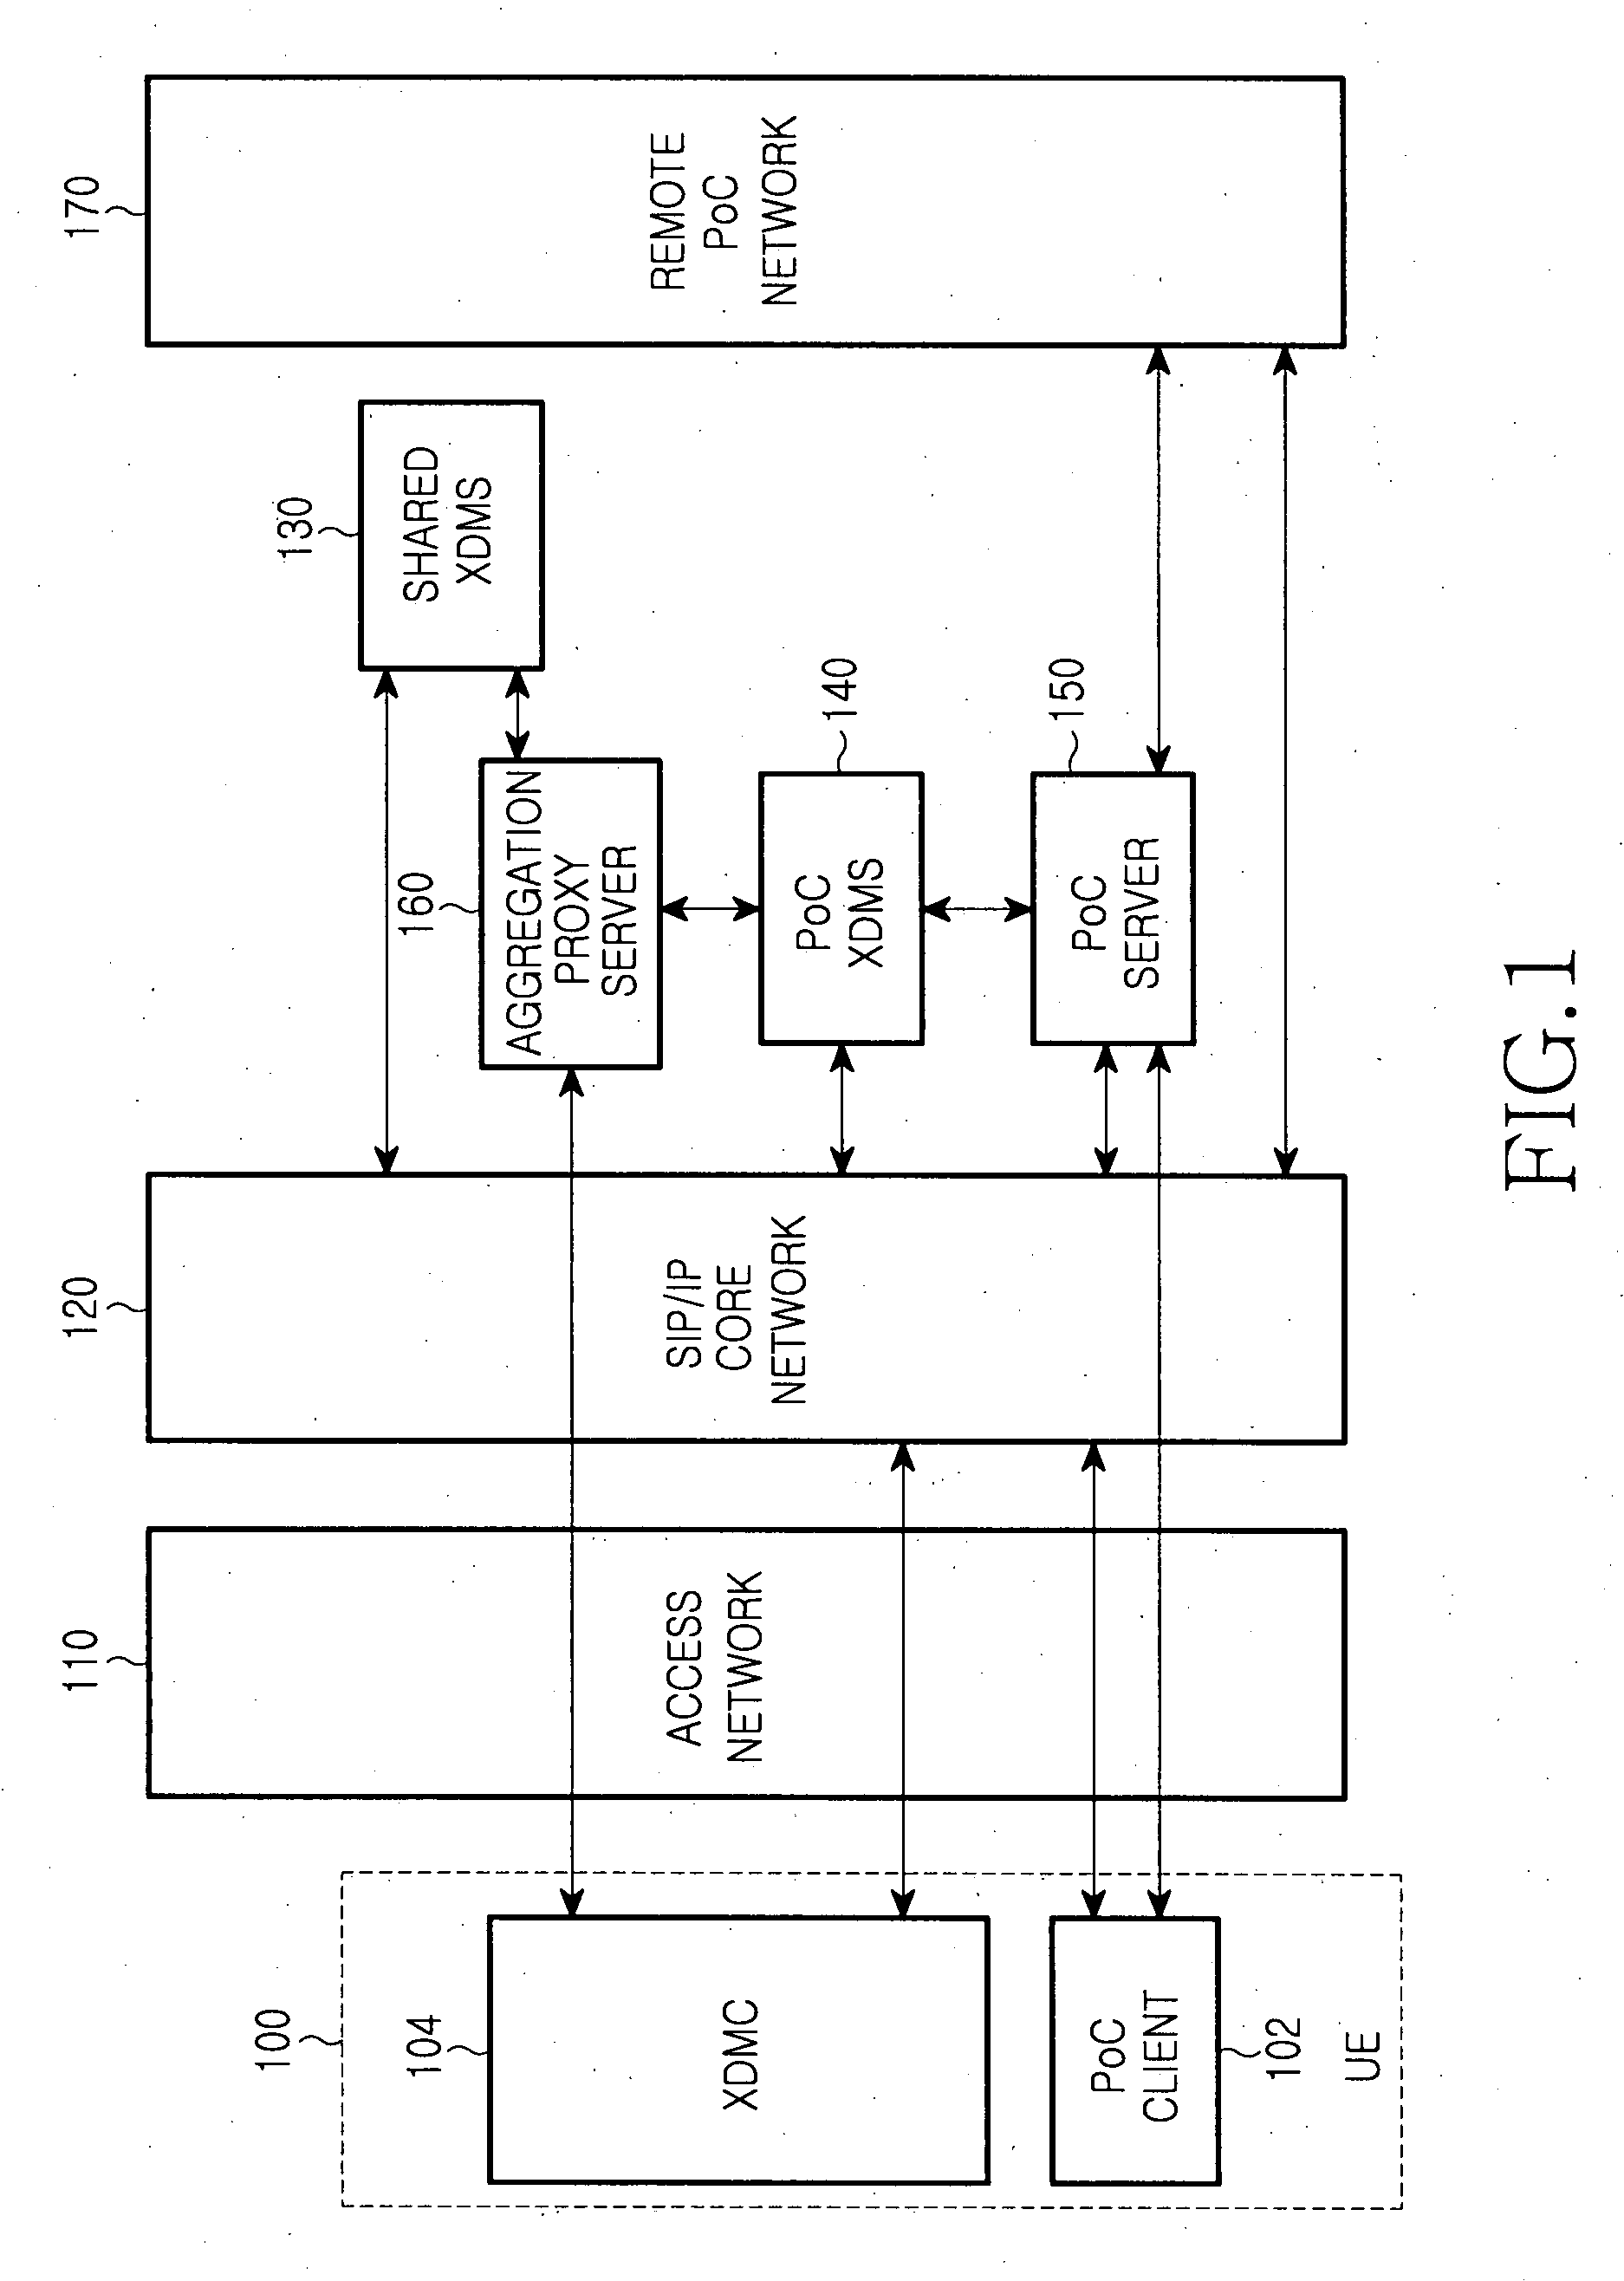 Method and system for providing a PoC box service in a PoC system